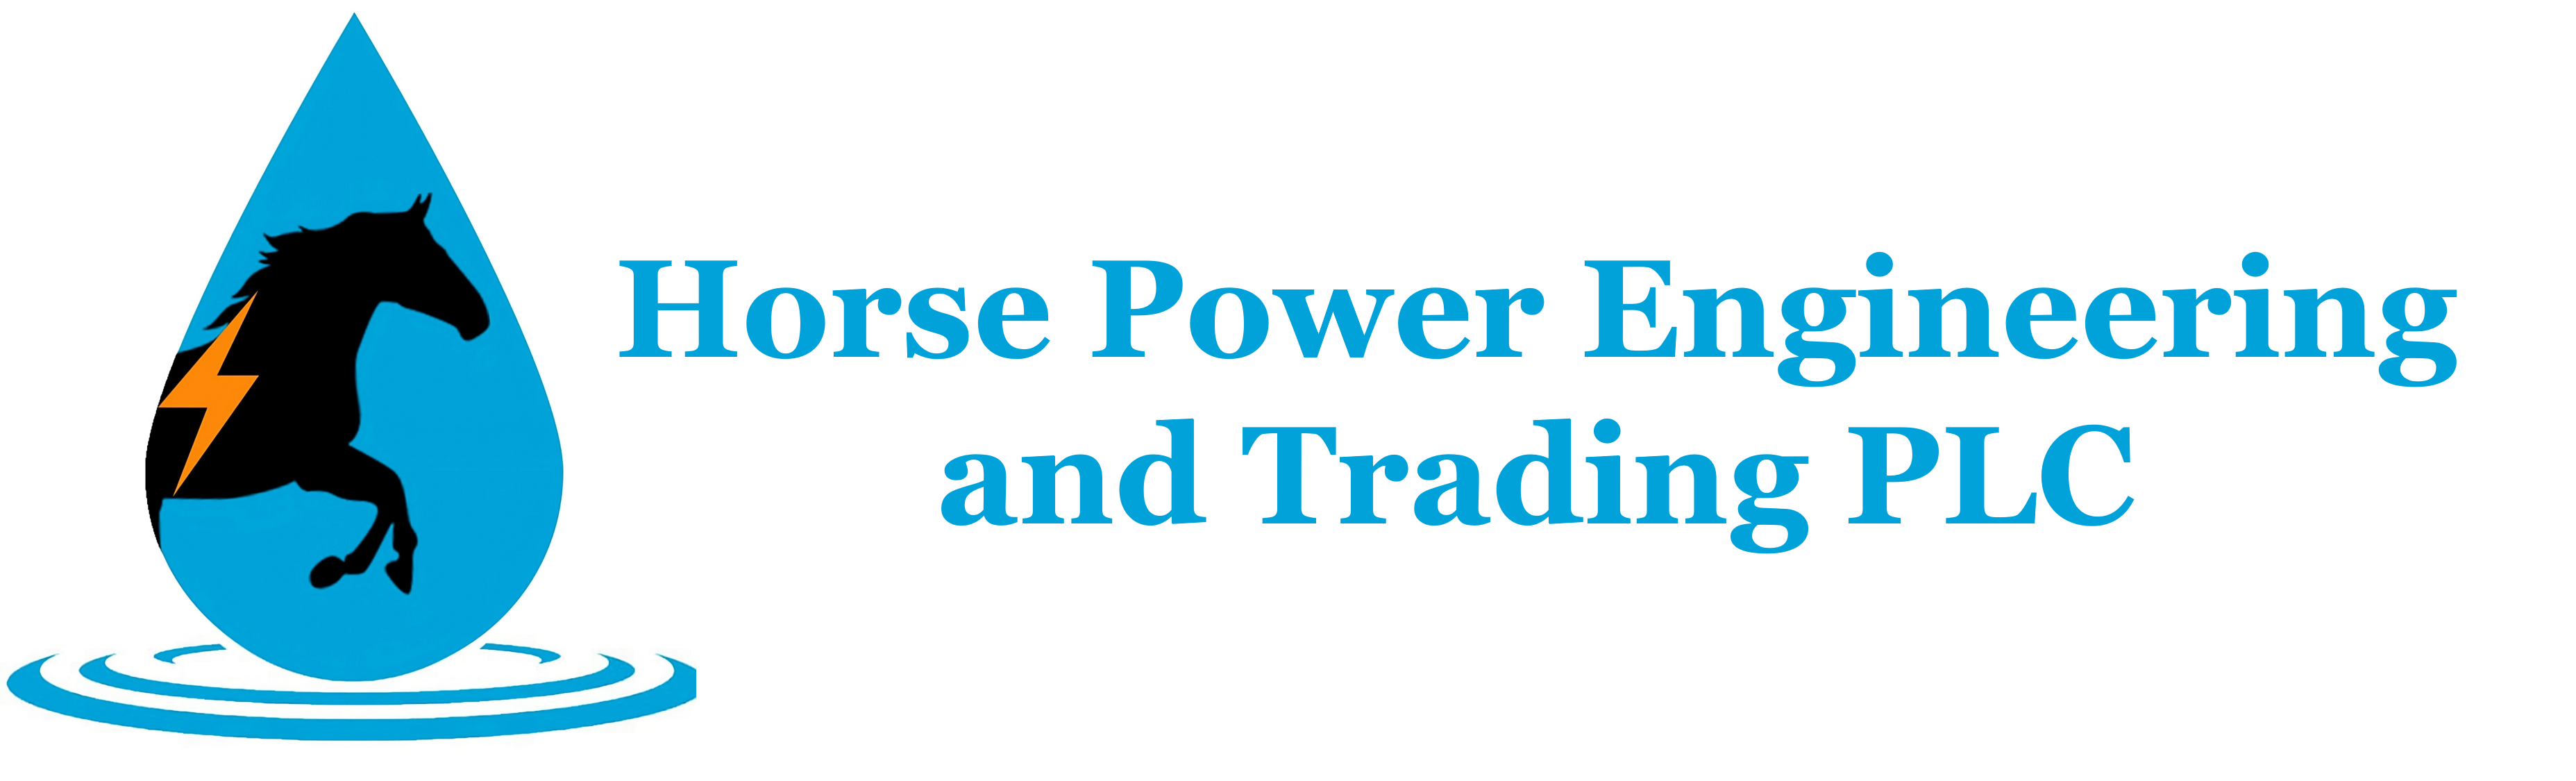 Horse Power Engineering and Trading P